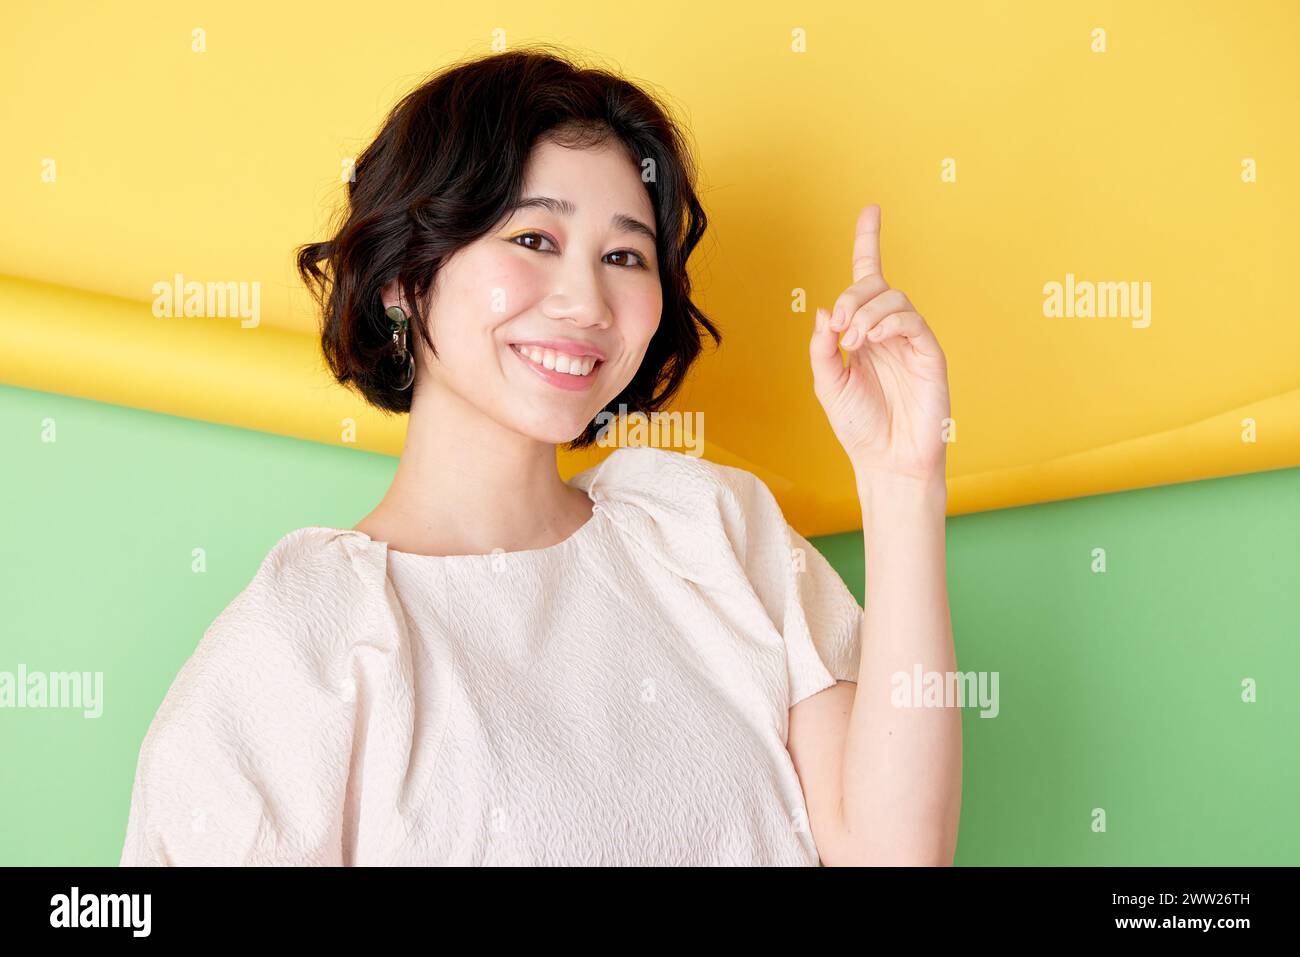 Asian woman pointing finger up on colorful background Stock Photo